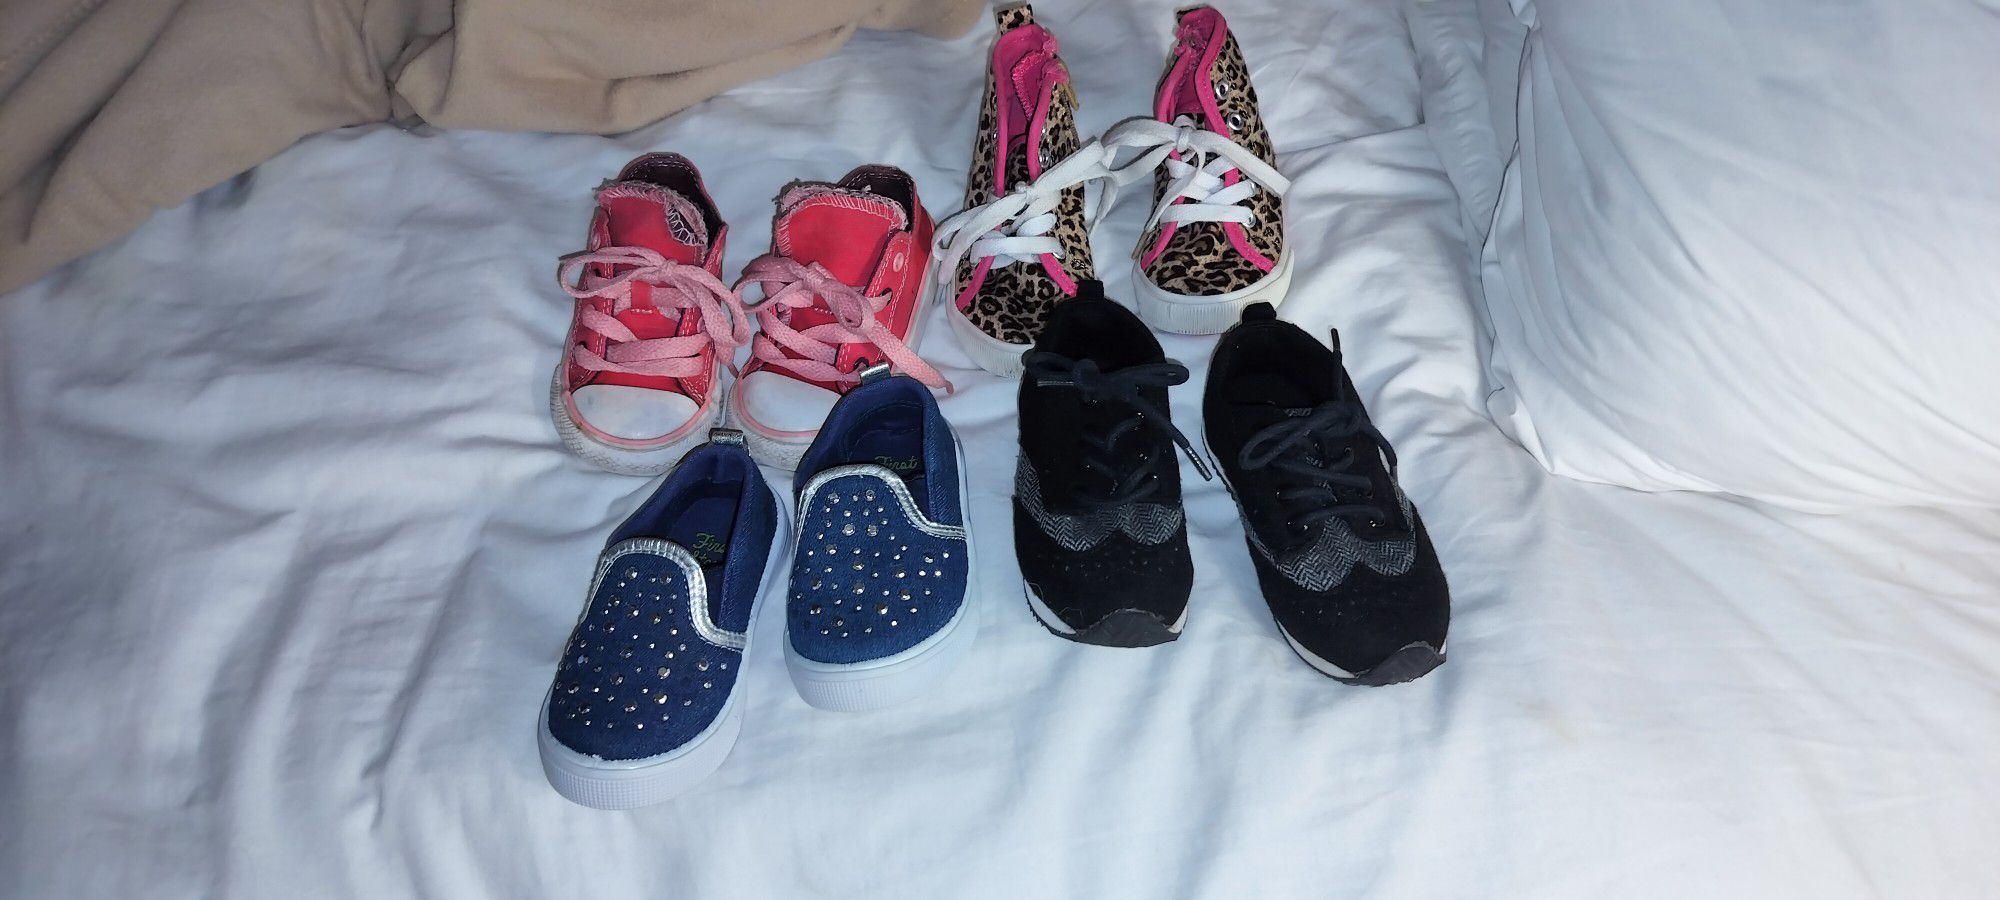 Girls Size 6 Sneakers / Shoes 4 Pairs